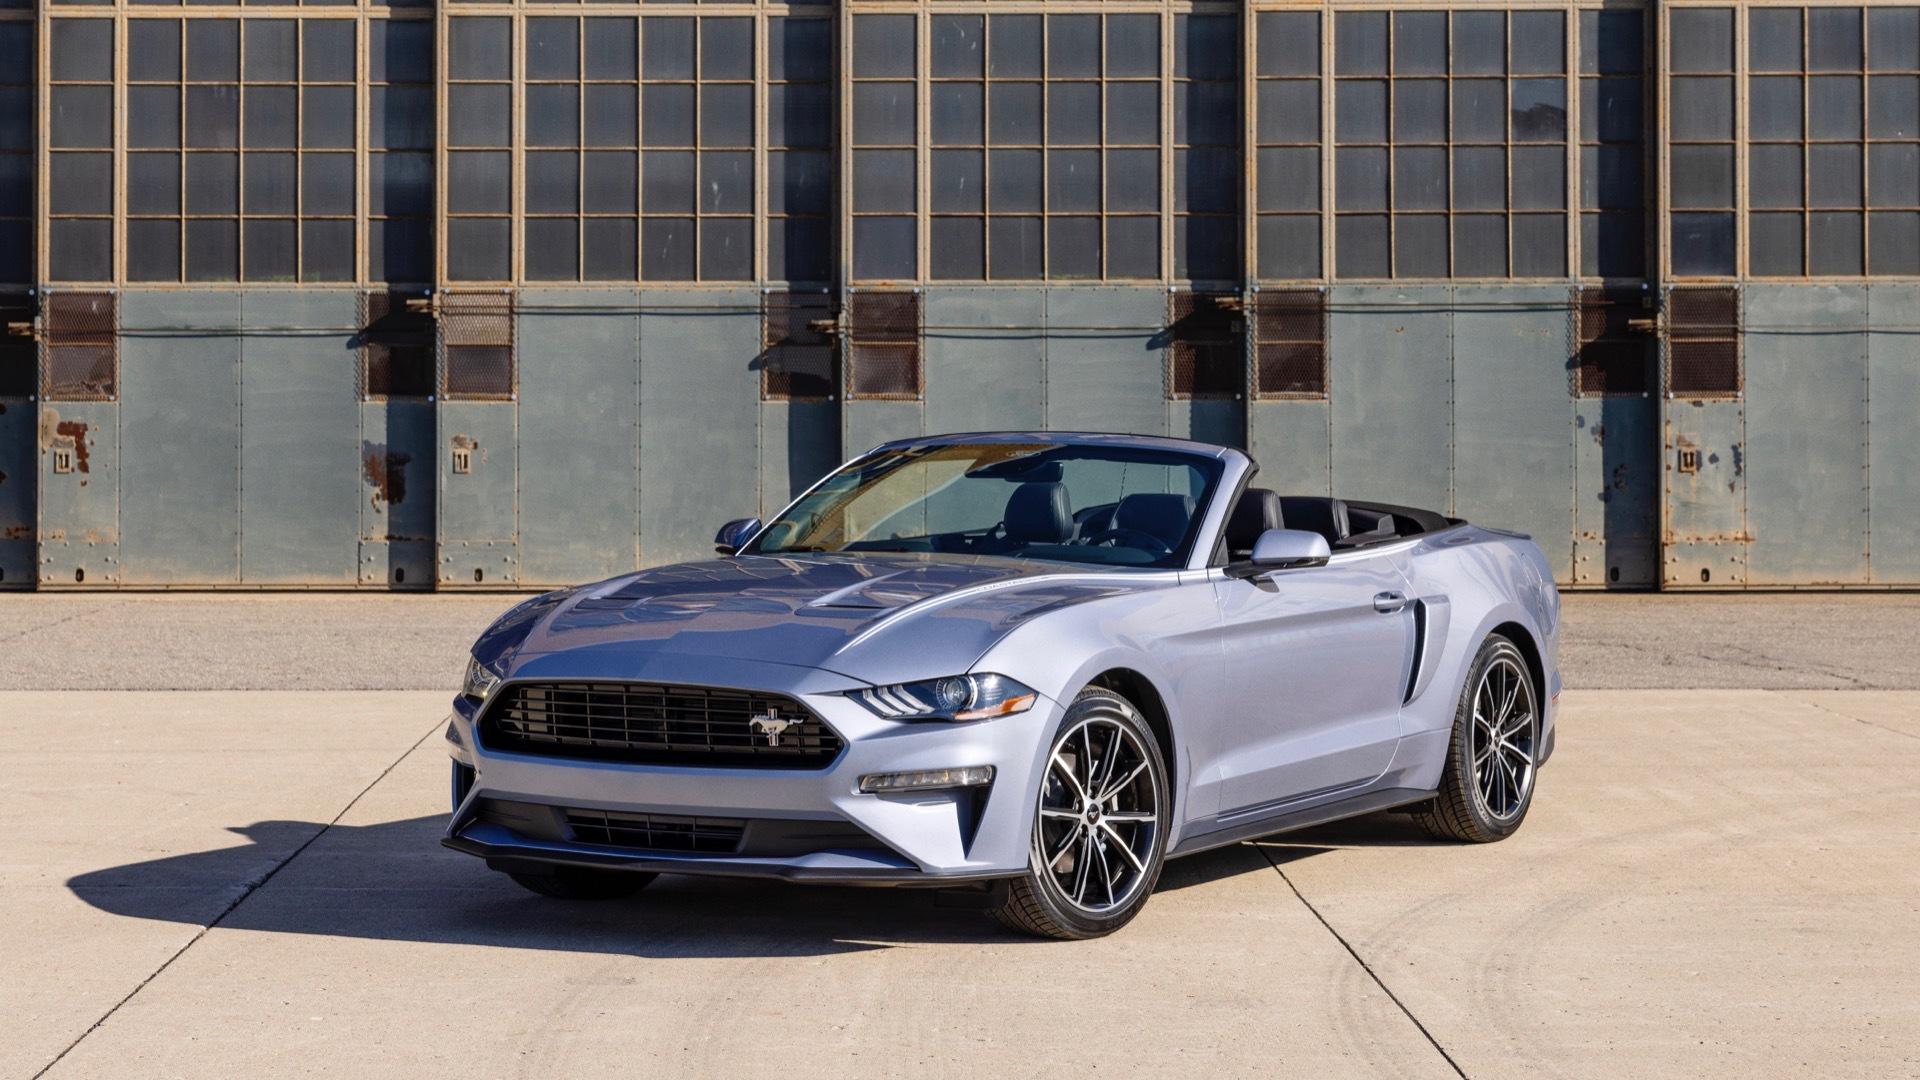 Court rules muscle car fans free to build Eleanorstyle Mustangs